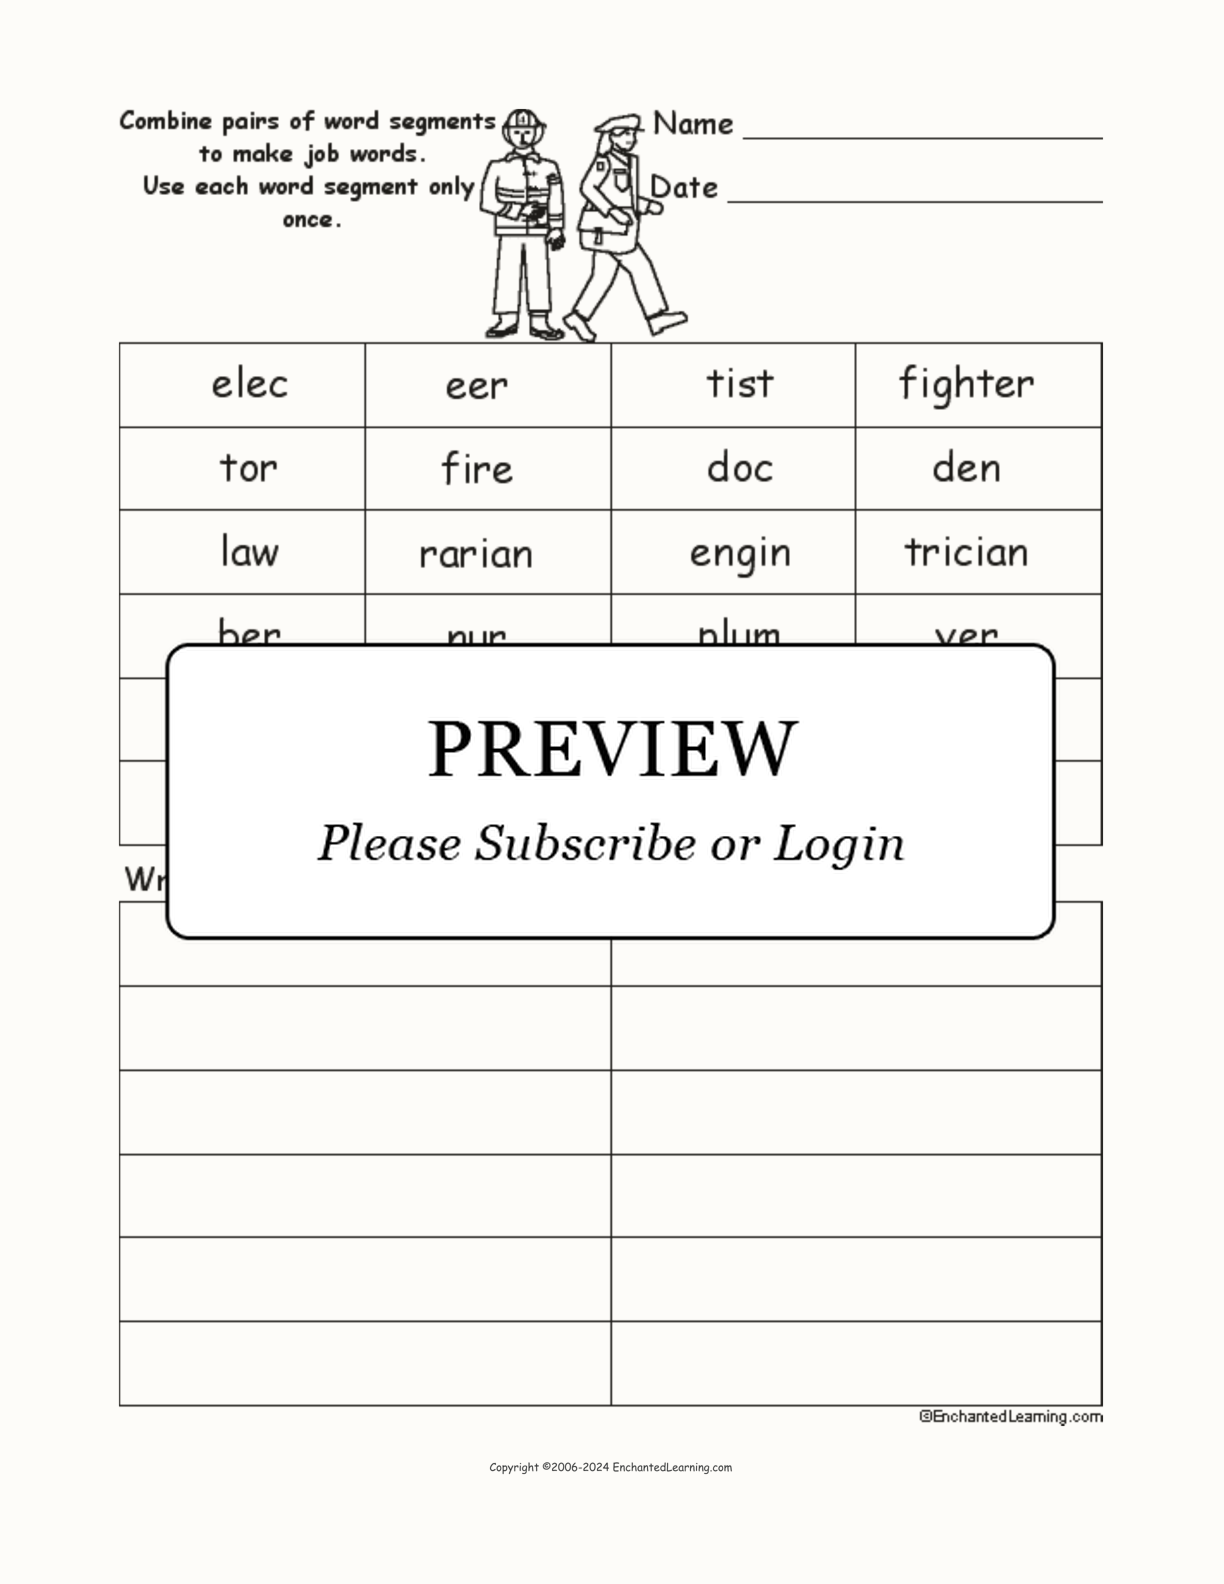 Job Word Pieces Puzzle interactive worksheet page 1